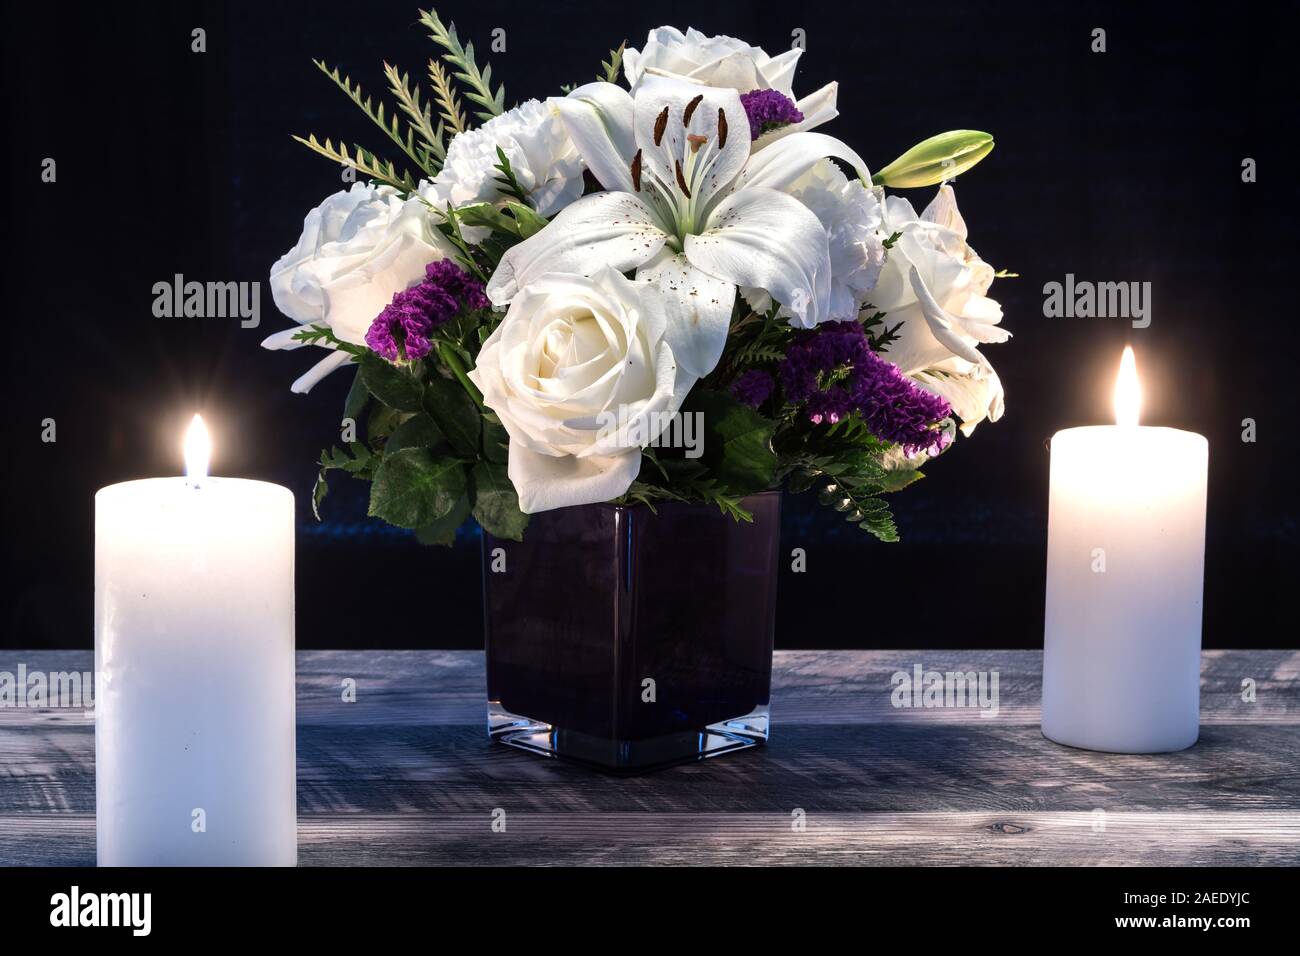 Bouquet of white flowers in a purple vase, white candle on a wooden boards. Vintage home decor dark tones. Condolence card. Stock Photo